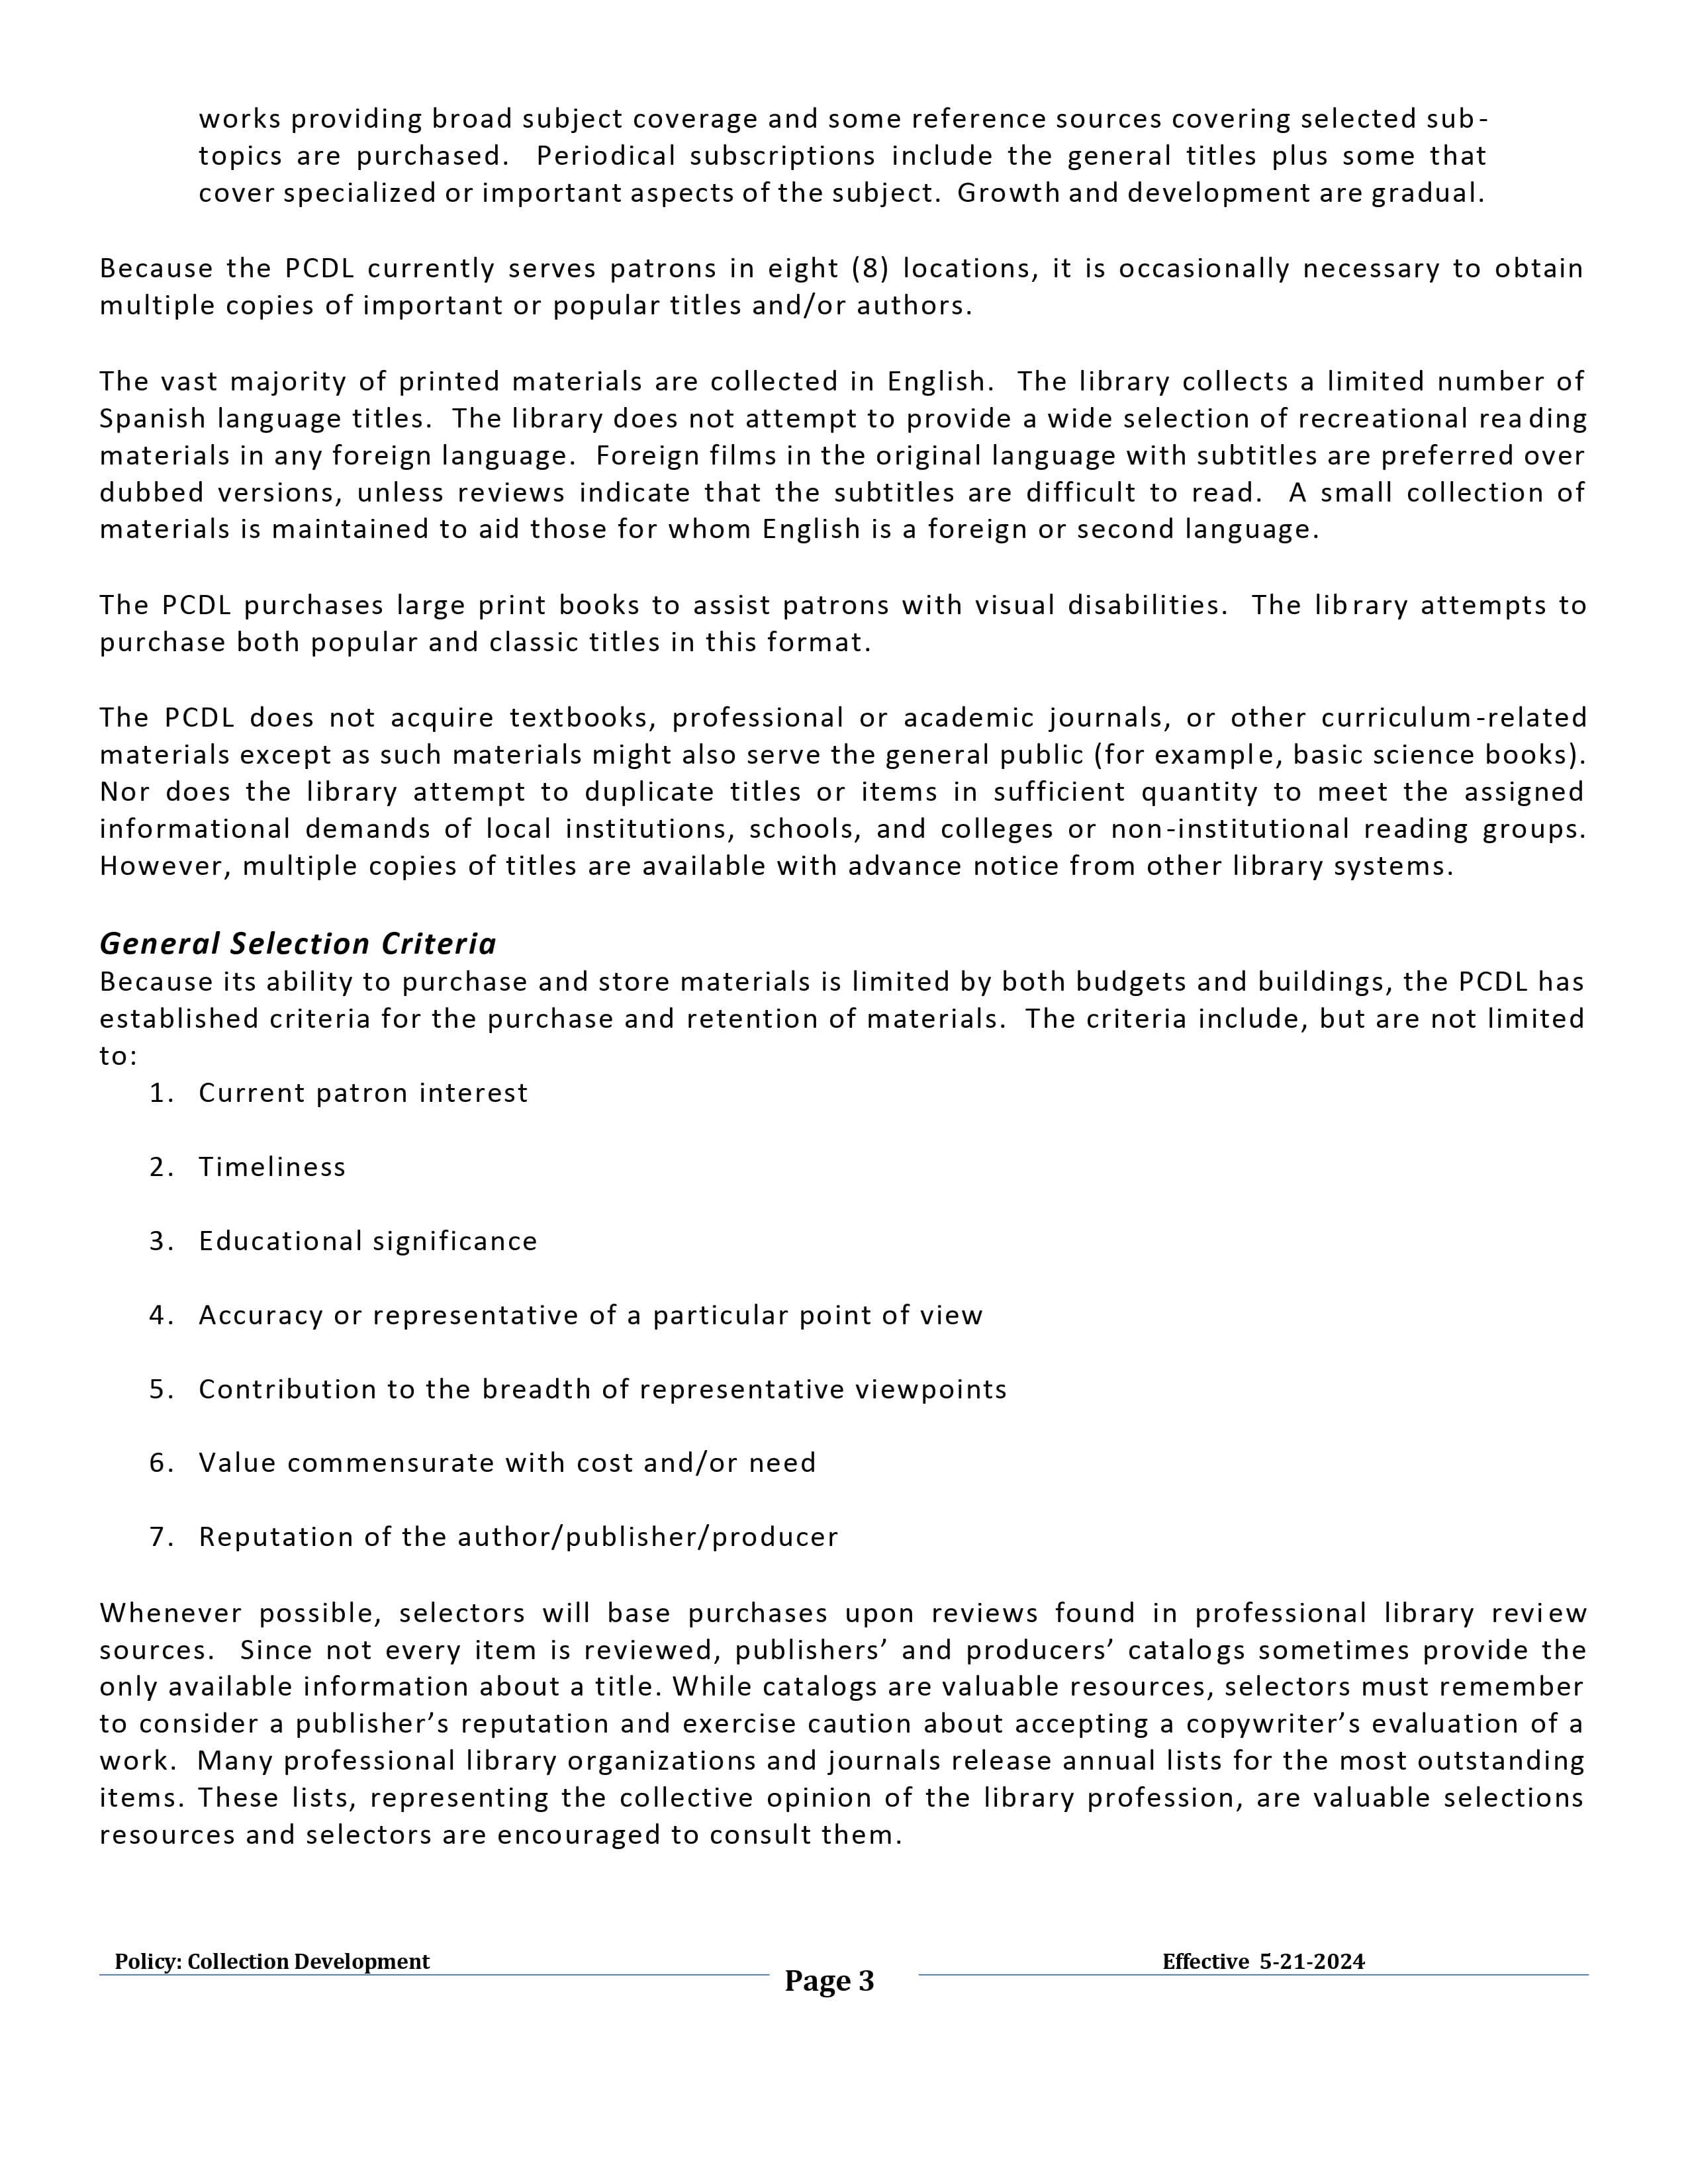 Collection Development Policy Page 3